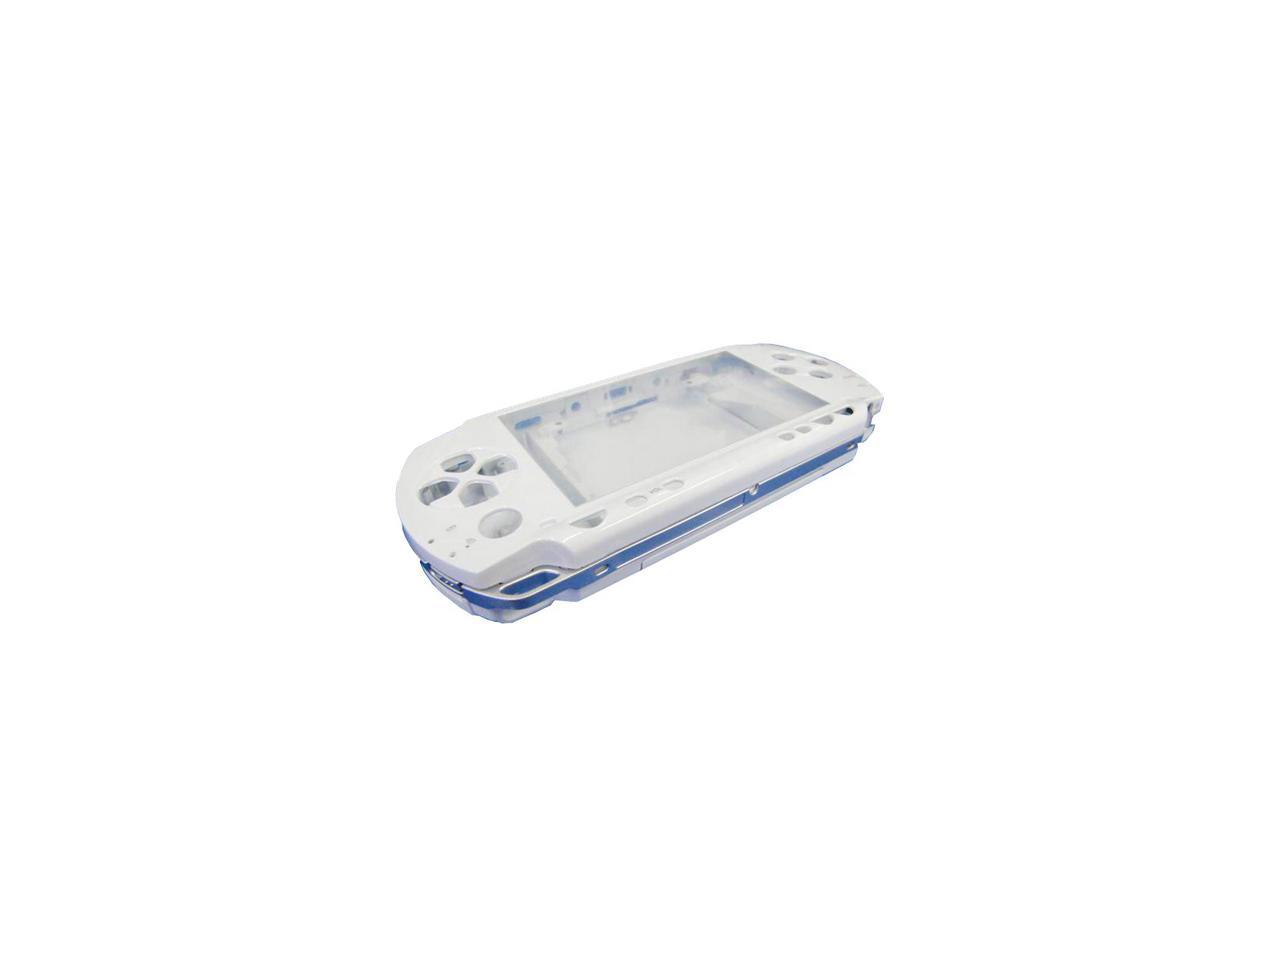 Full Housing Repair Mod Case Buttons Replacement For Sony Psp 1000 Console Newegg Com